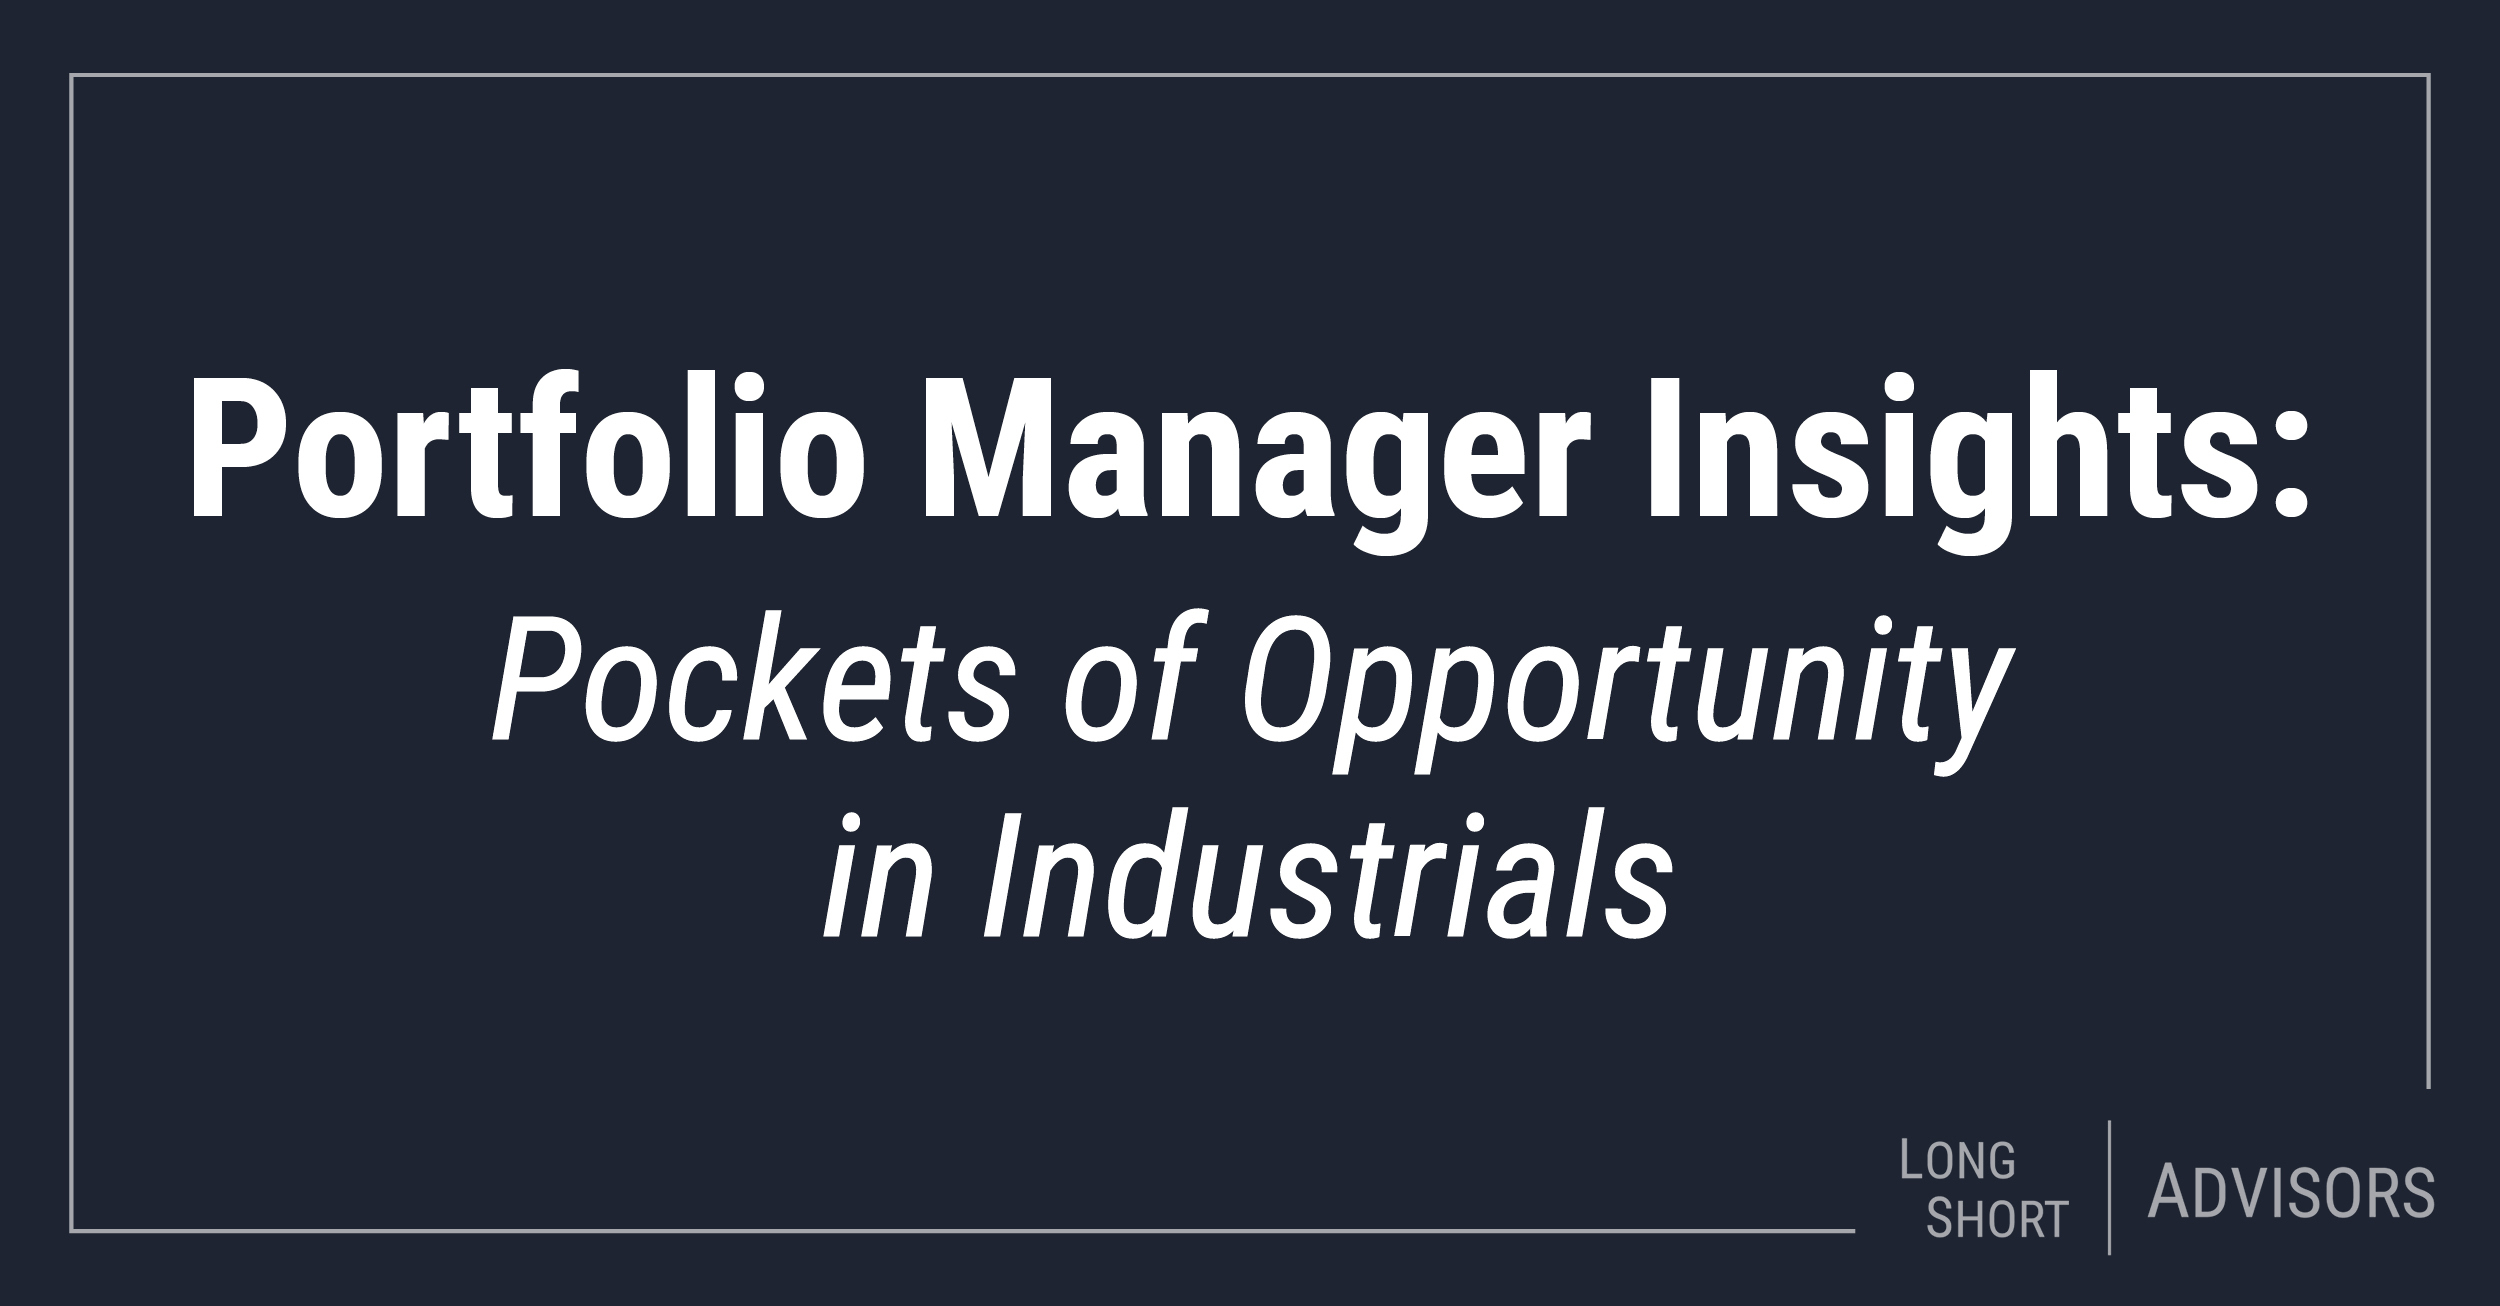 Pockets of Opportunity in Industrials